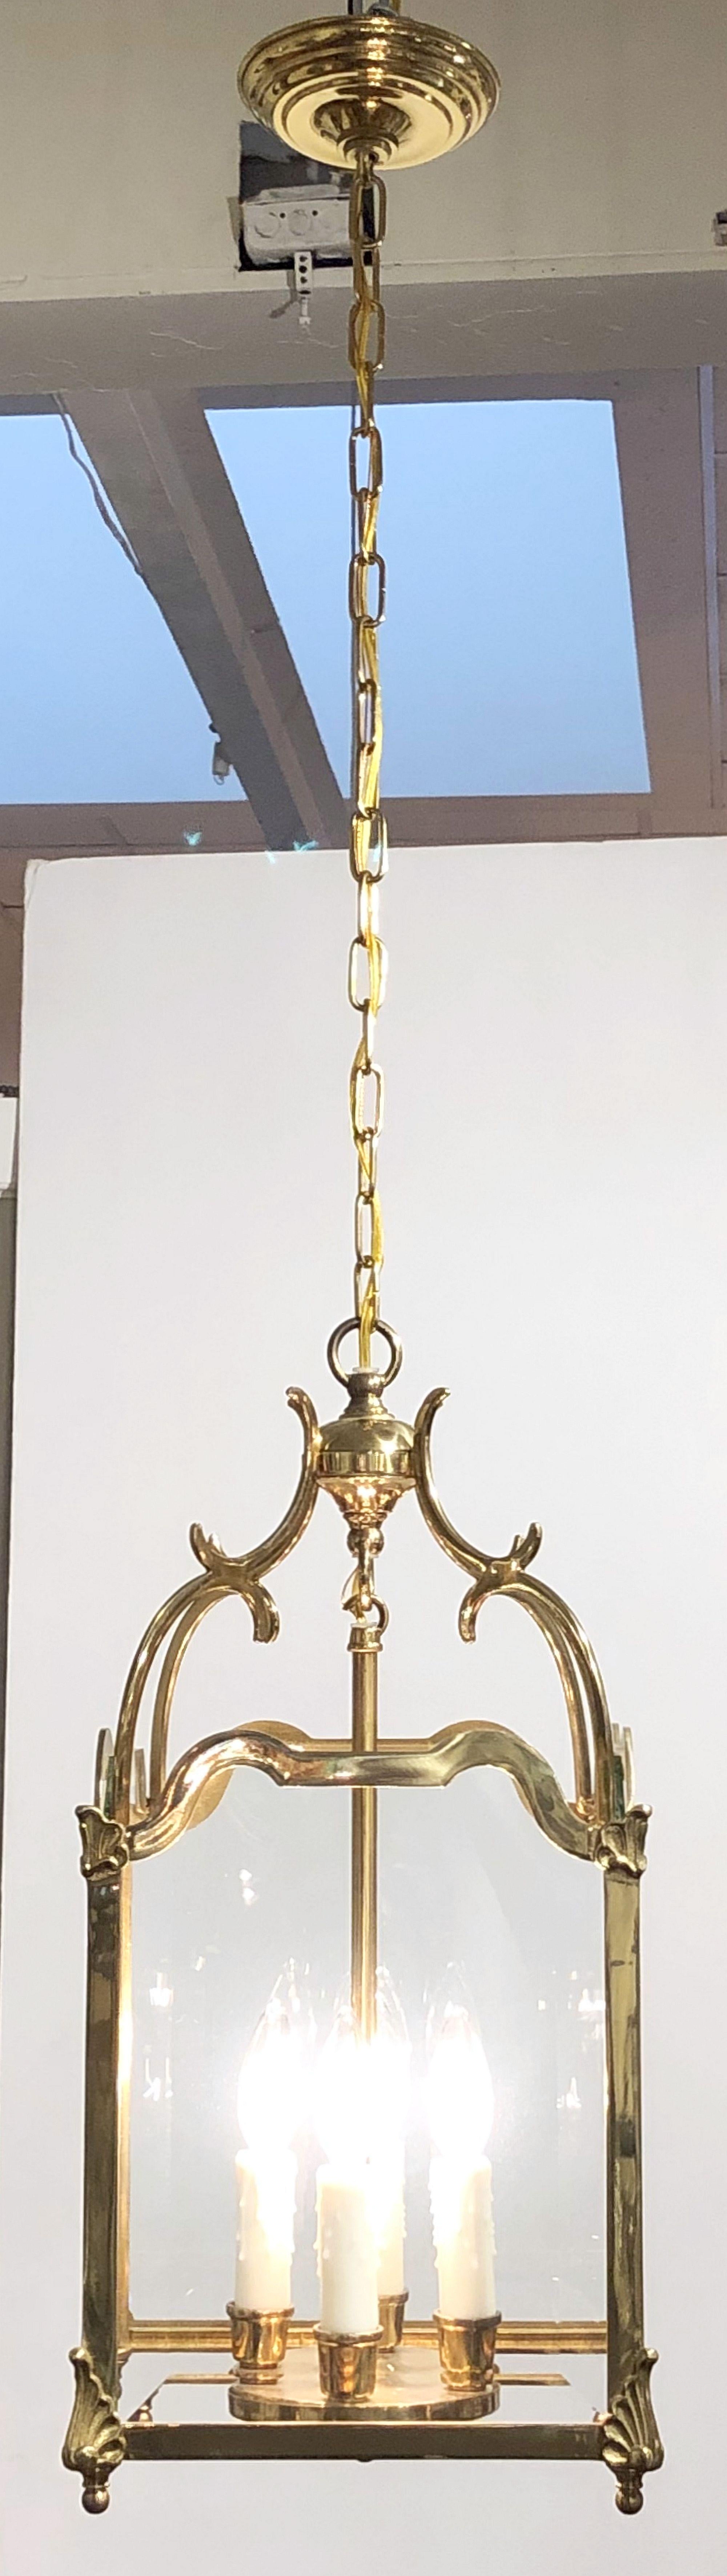 20th Century English Four-Light Hanging Lantern or Light Fixture of Brass with Beveled Glass